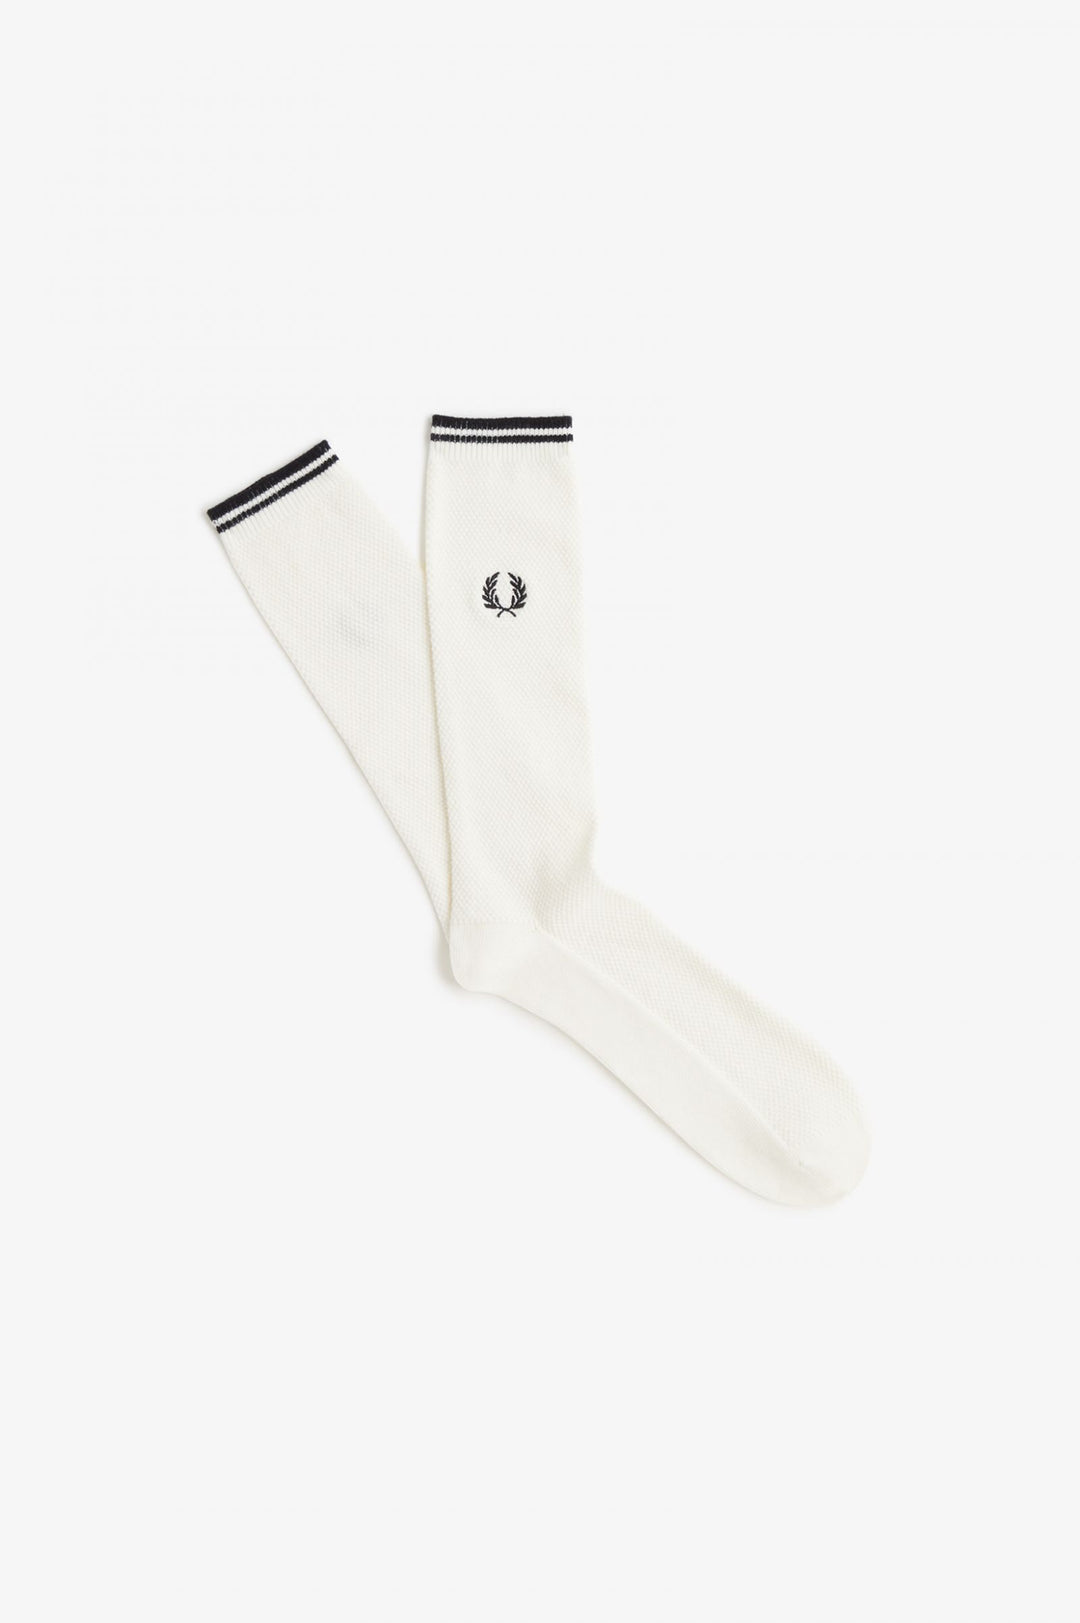 Fred Perry Tipped Socks - Snow White/Black